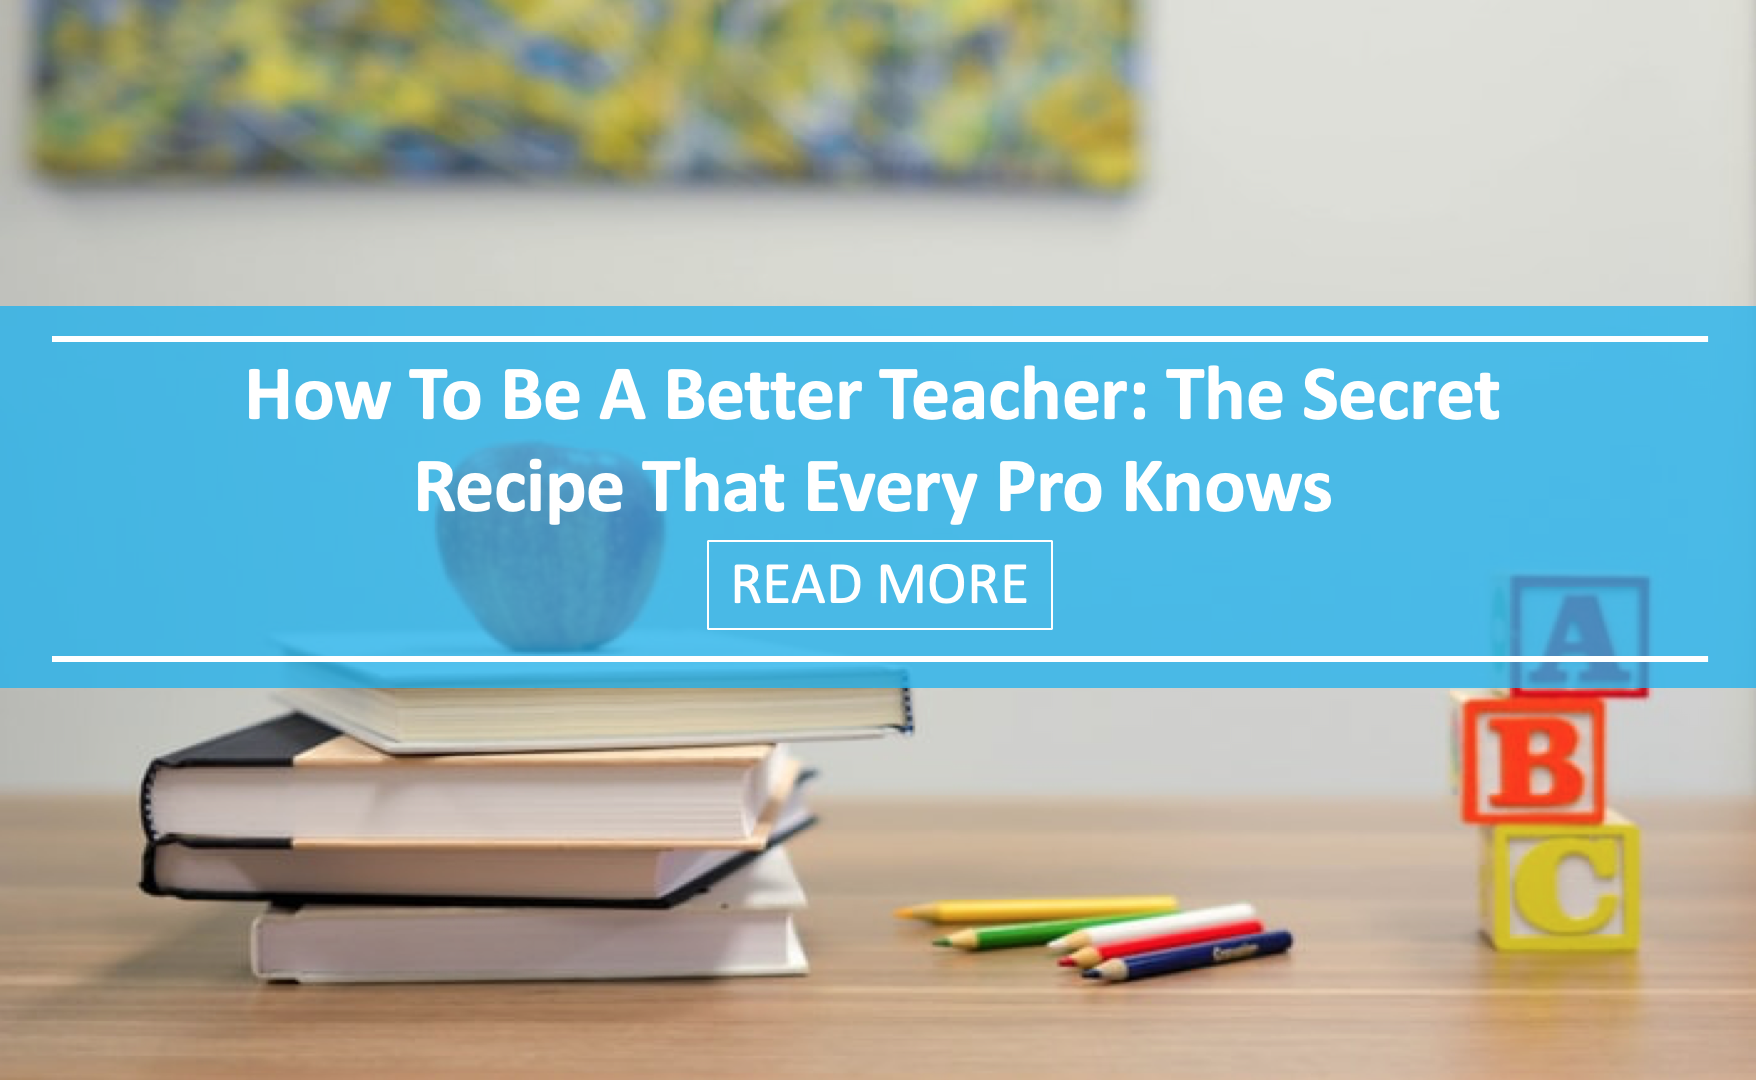 How To Be A Better Teacher: The Secret Recipe That Every Pro Knows